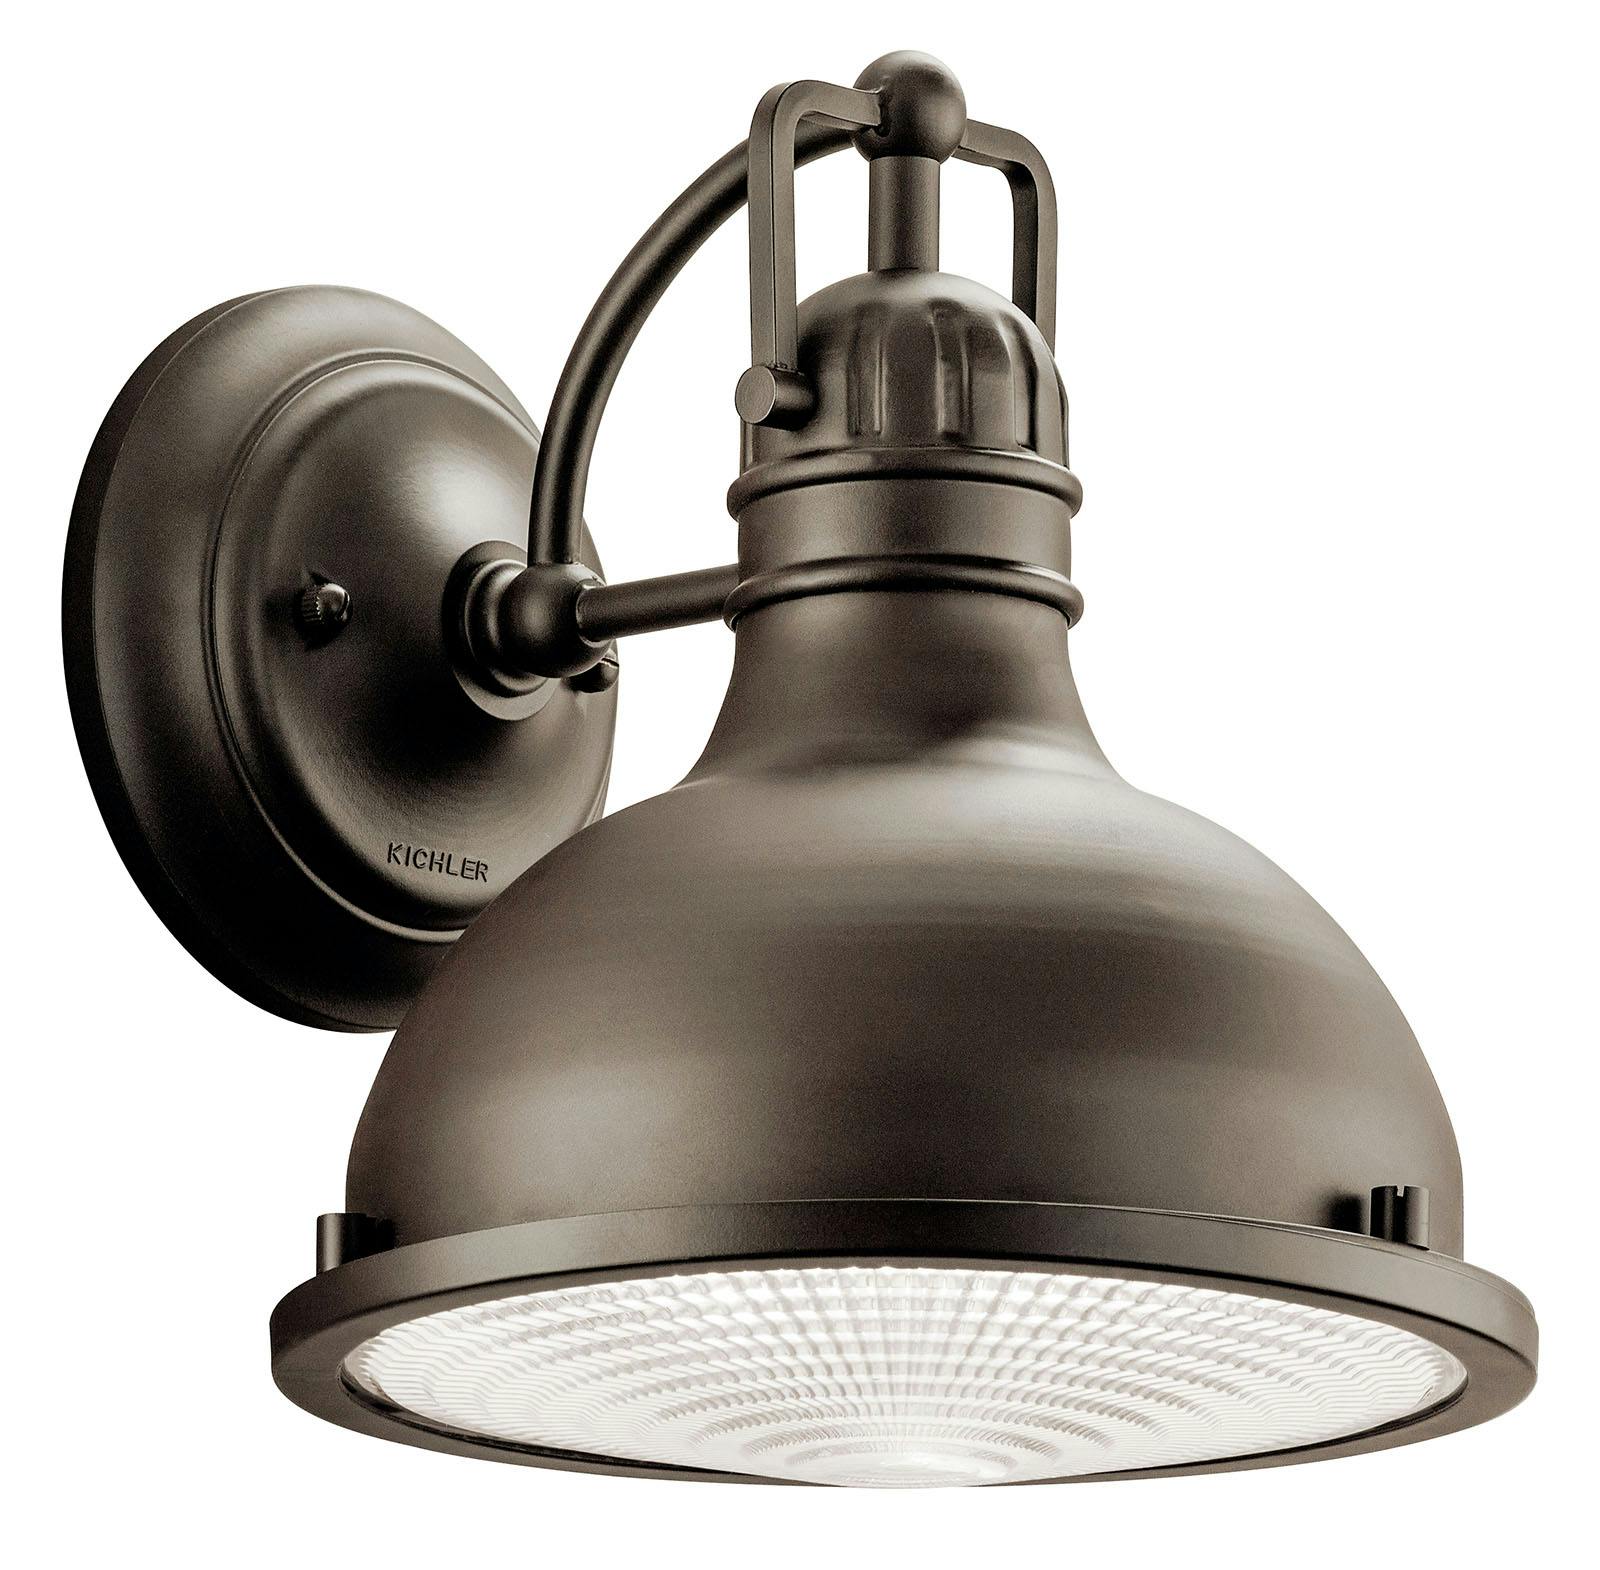 Hatteras Bay 9.5" Wall Light Olde Bronze on a white background